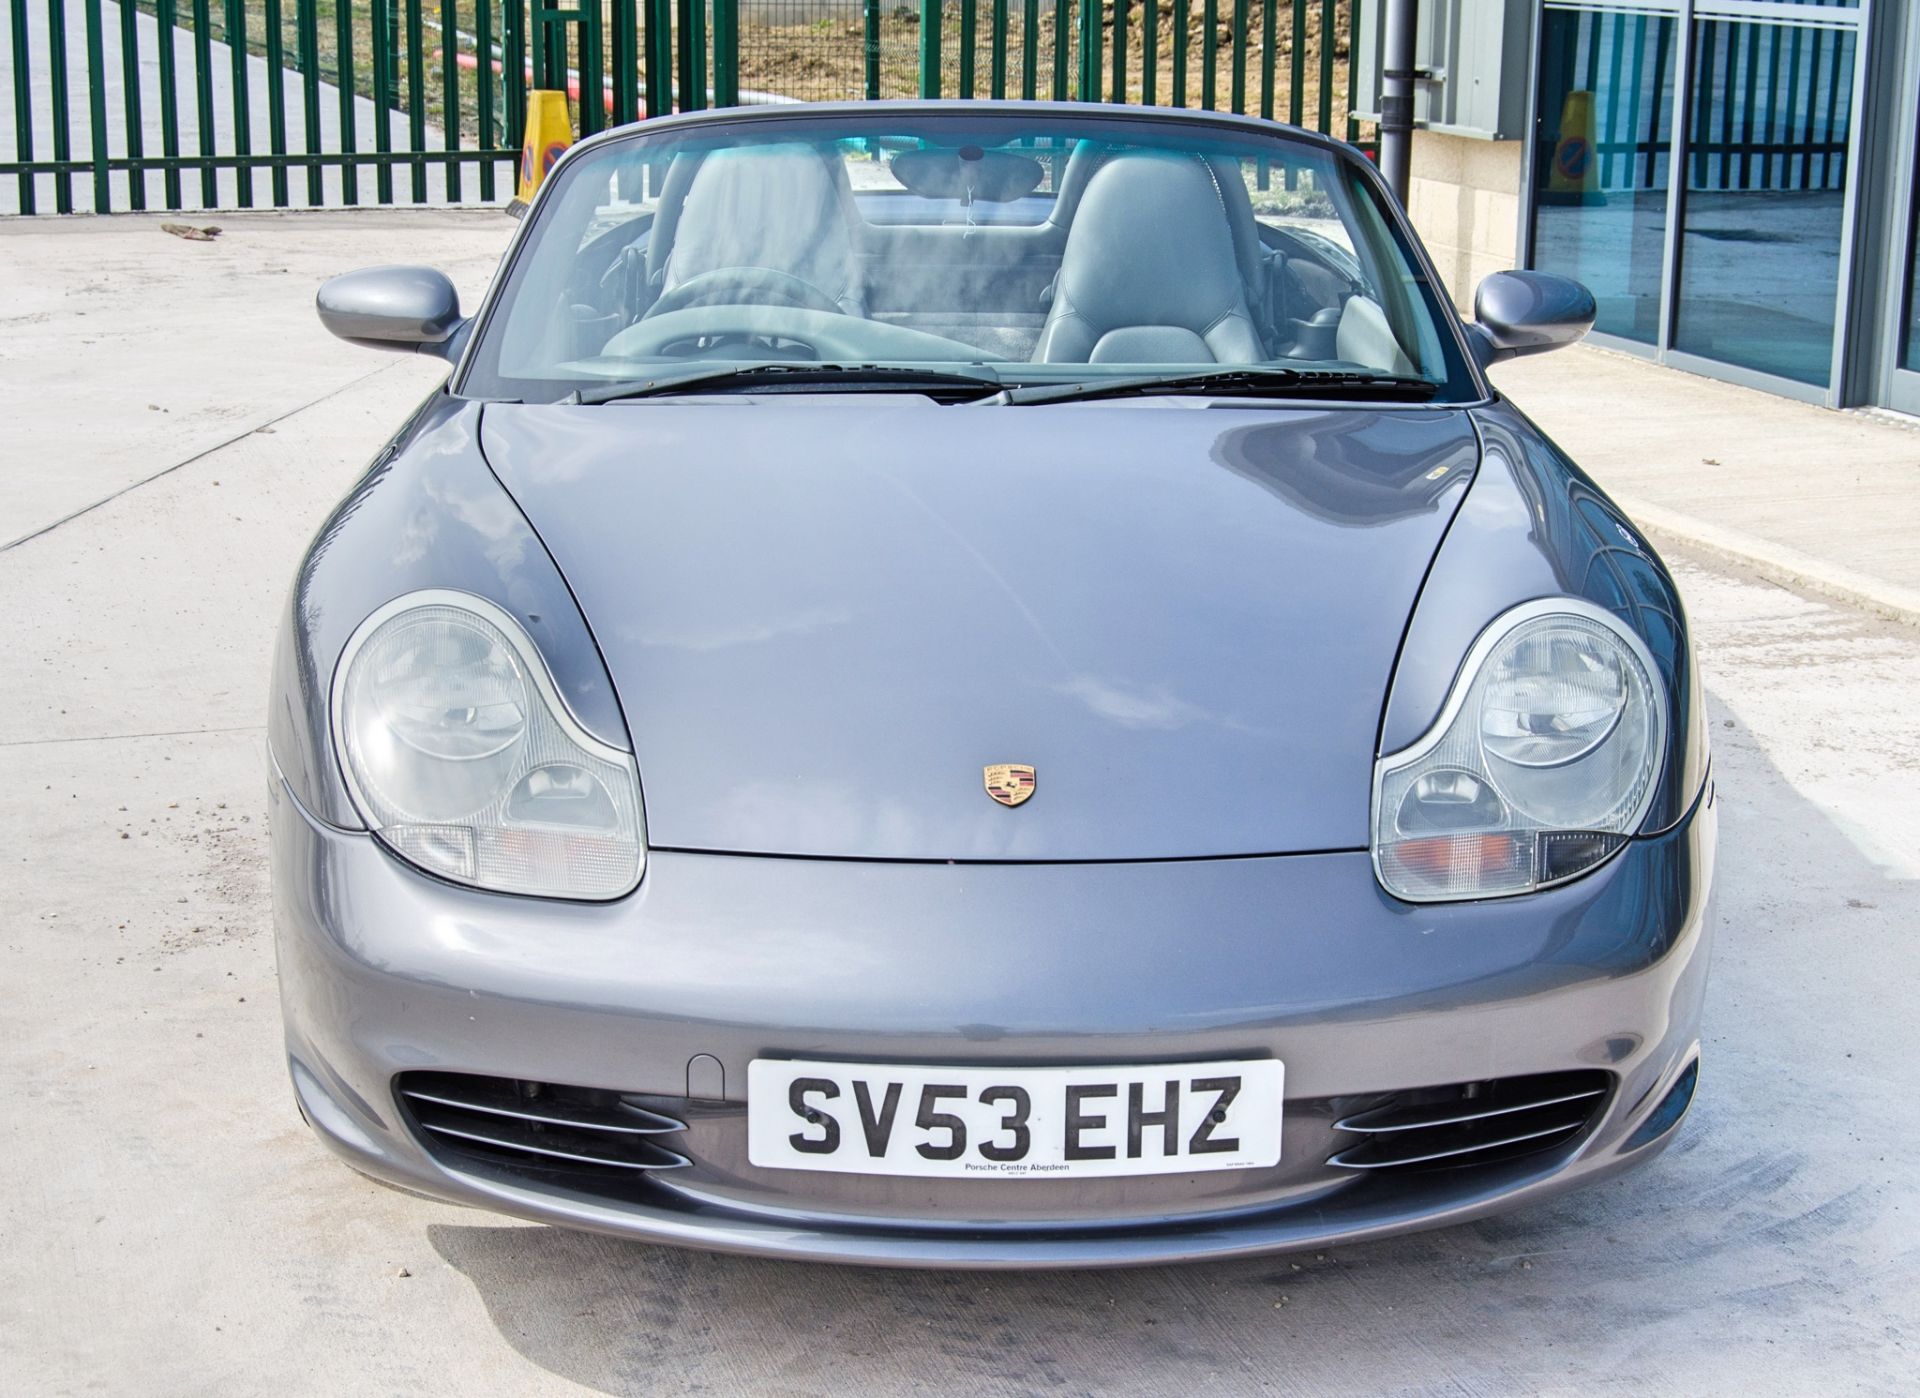 2003 Porsche Boxster 2.7 5 speed manual convertible roadster - Image 10 of 50